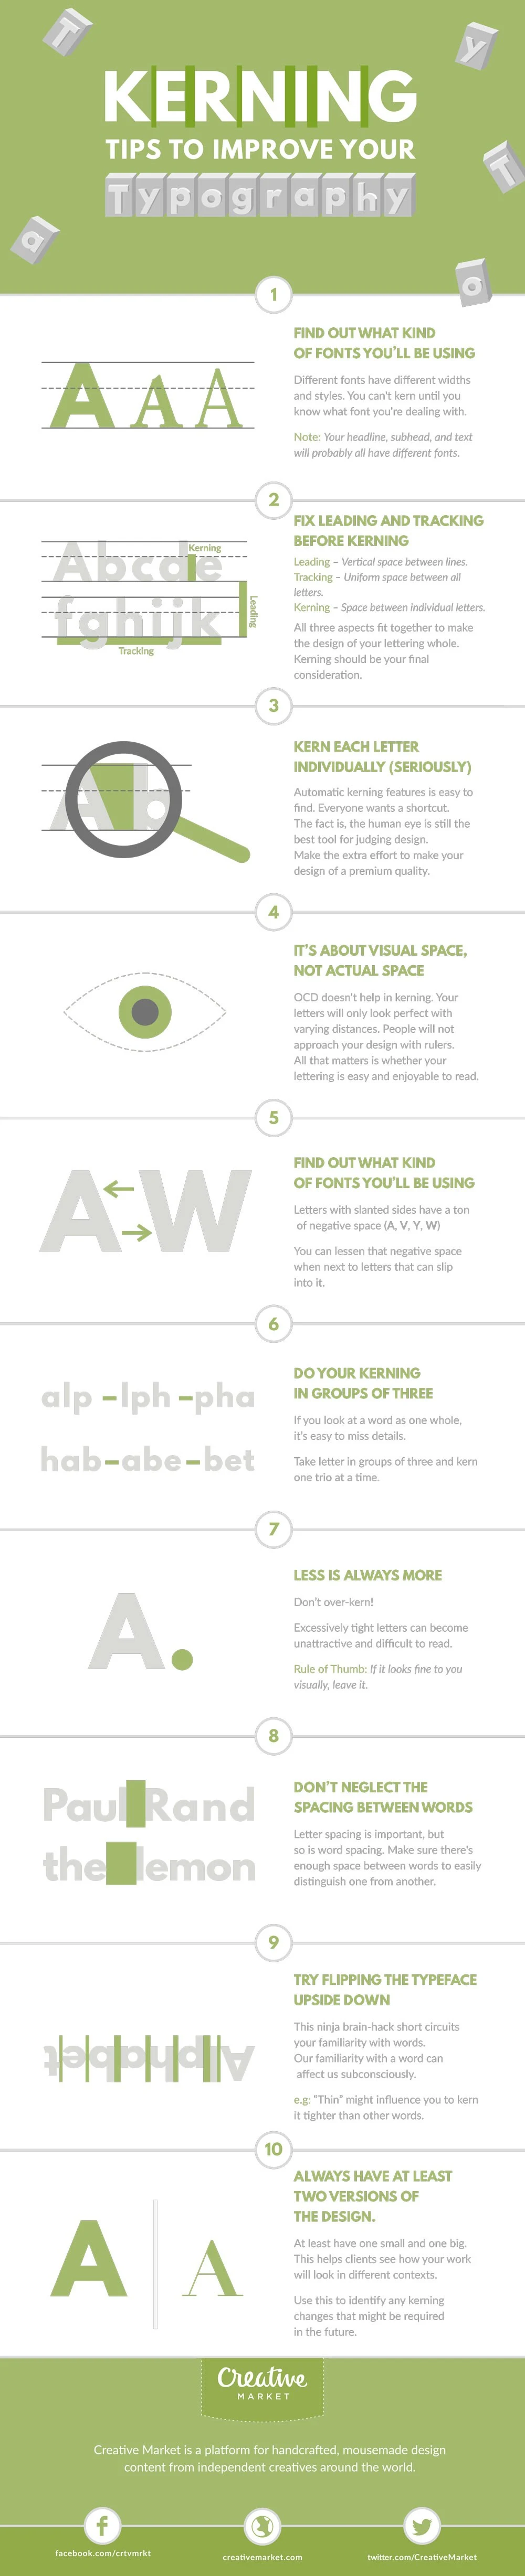 Kerning Tips to Improve Your Typography - #infographic